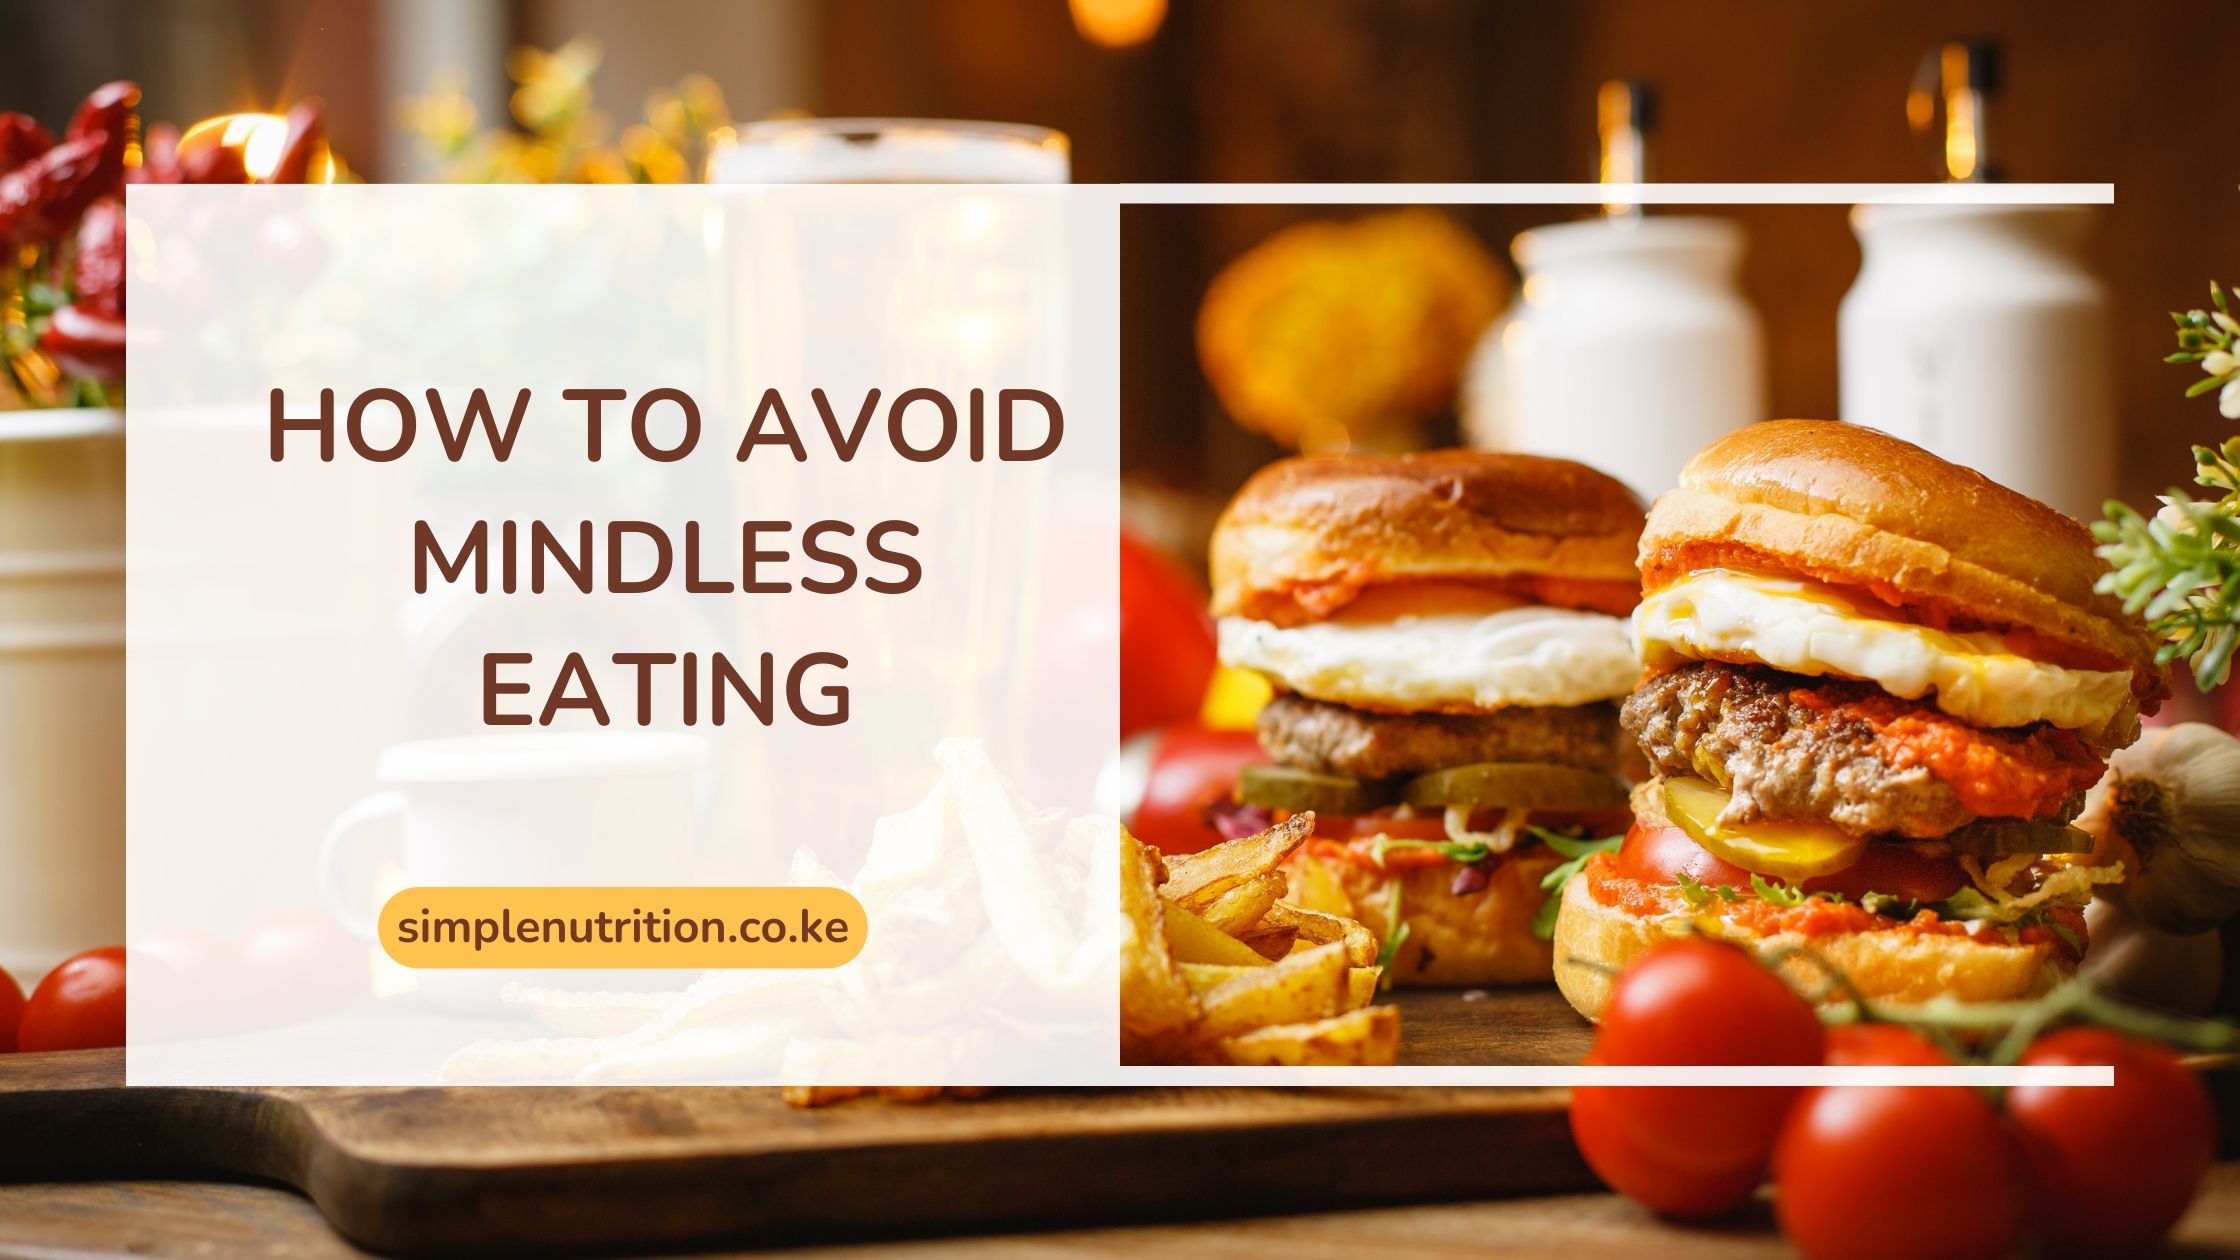 How to Avoid Mindless Eating